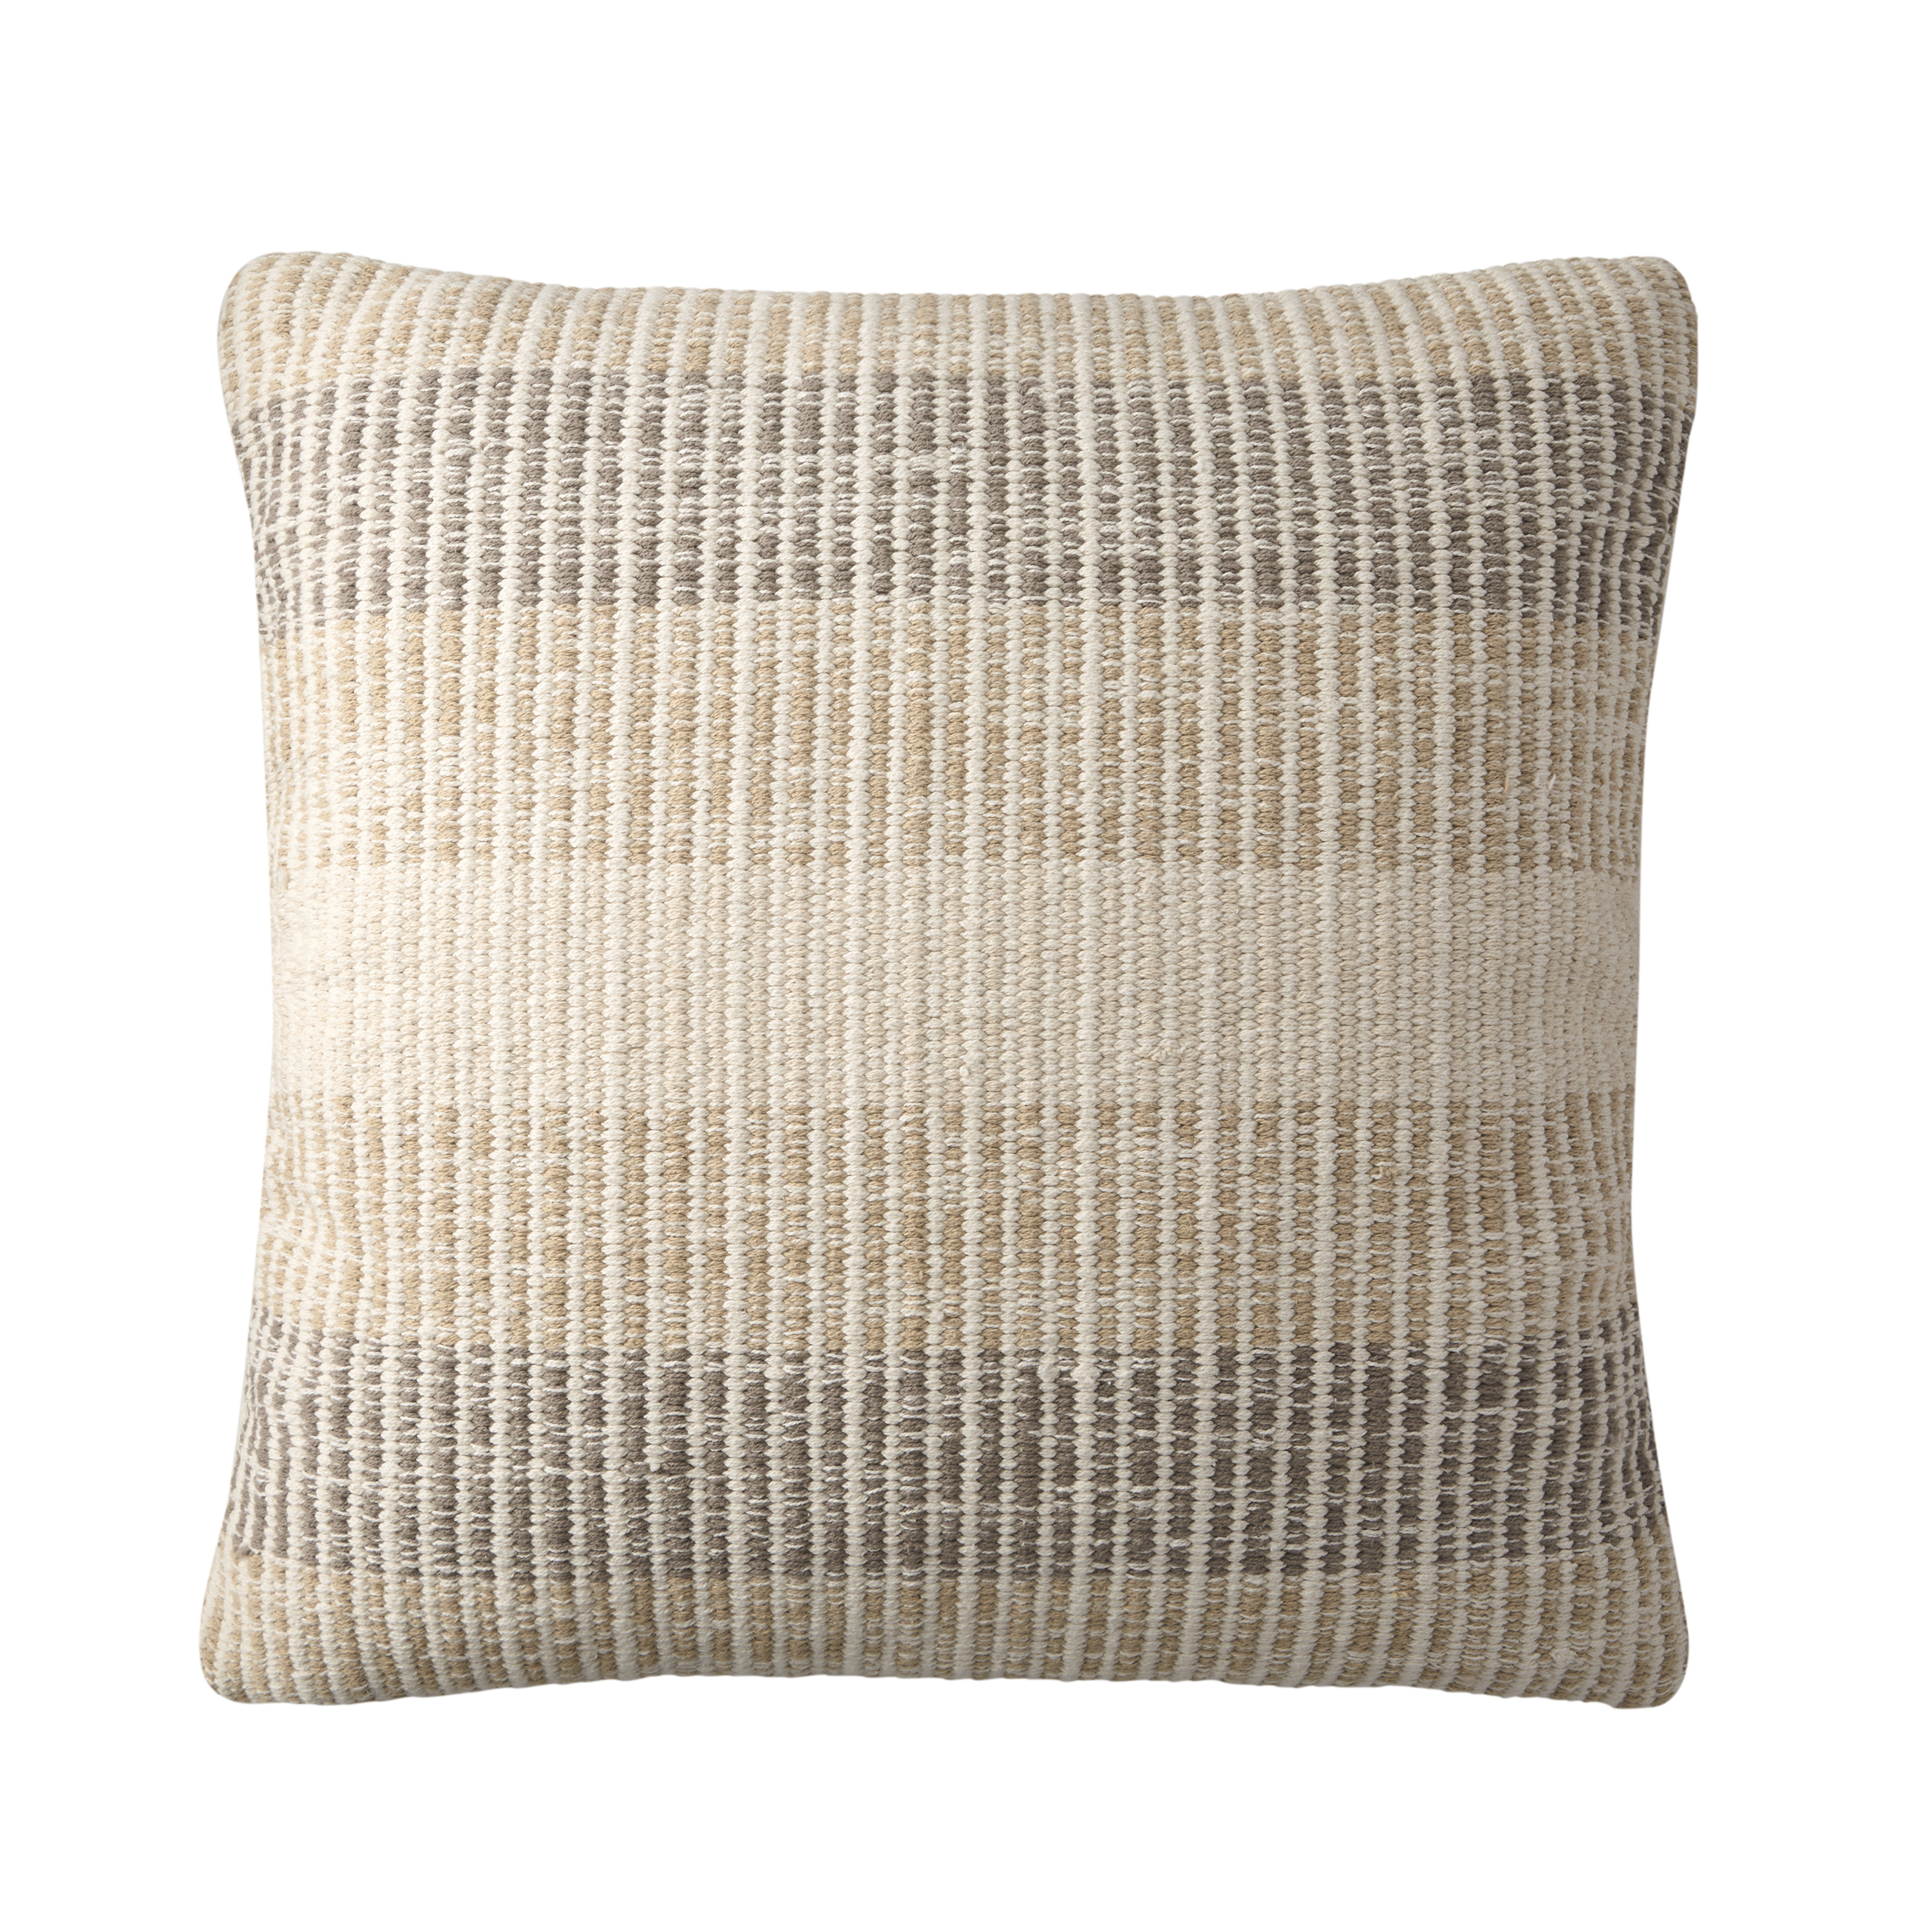 Better Homes & Gardens Liam Textured Stripe 24 inch x 24 inch Pillow by Dave & Jenny Marrs, BHD266170517104